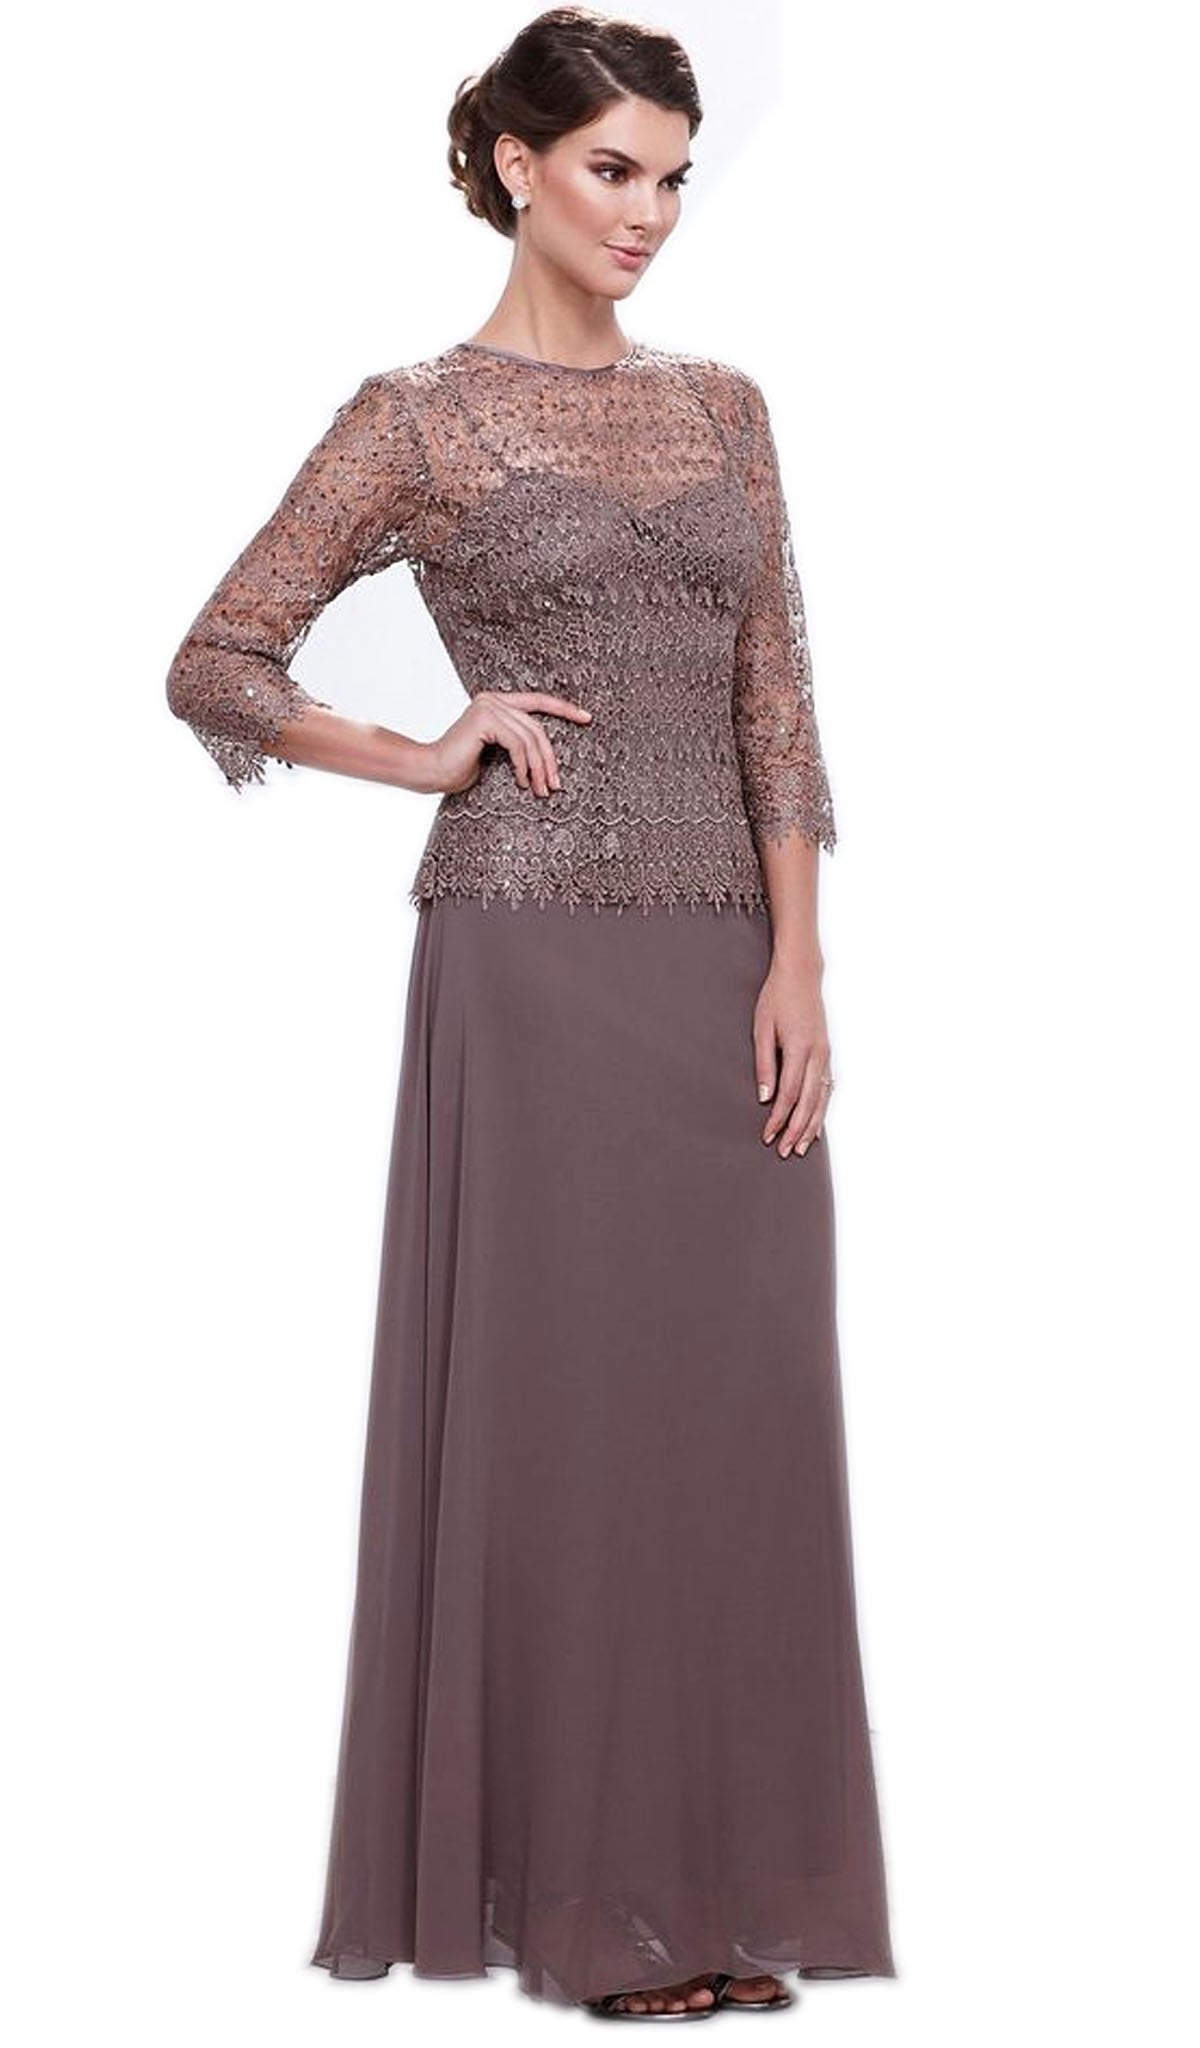 Nox Anabel - 5083 Quarter Sleeves Lace Overlay Top Long Formal Dress Special Occasion Dress M / Mocha